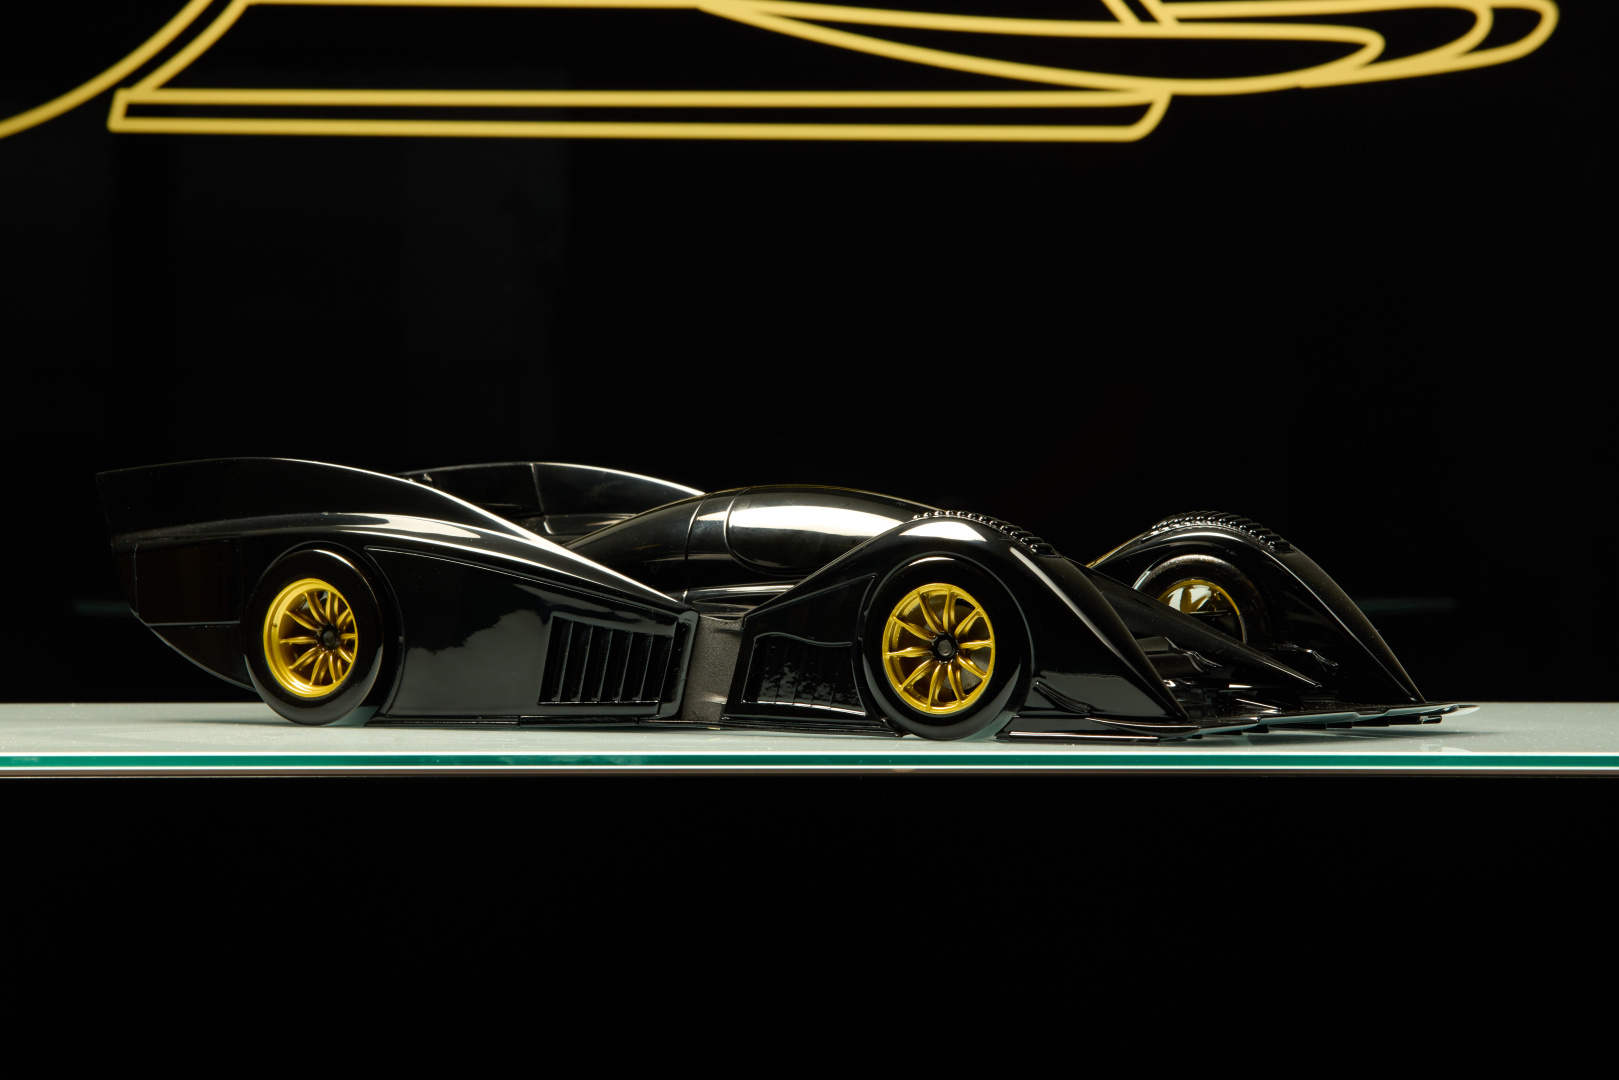 SMALL_Rodin_Cars_officially_announce_1200_HP_sub-700kg_track_hypercar_the_FZERO_(diecast_model_pictured)_is_coming_in_2023